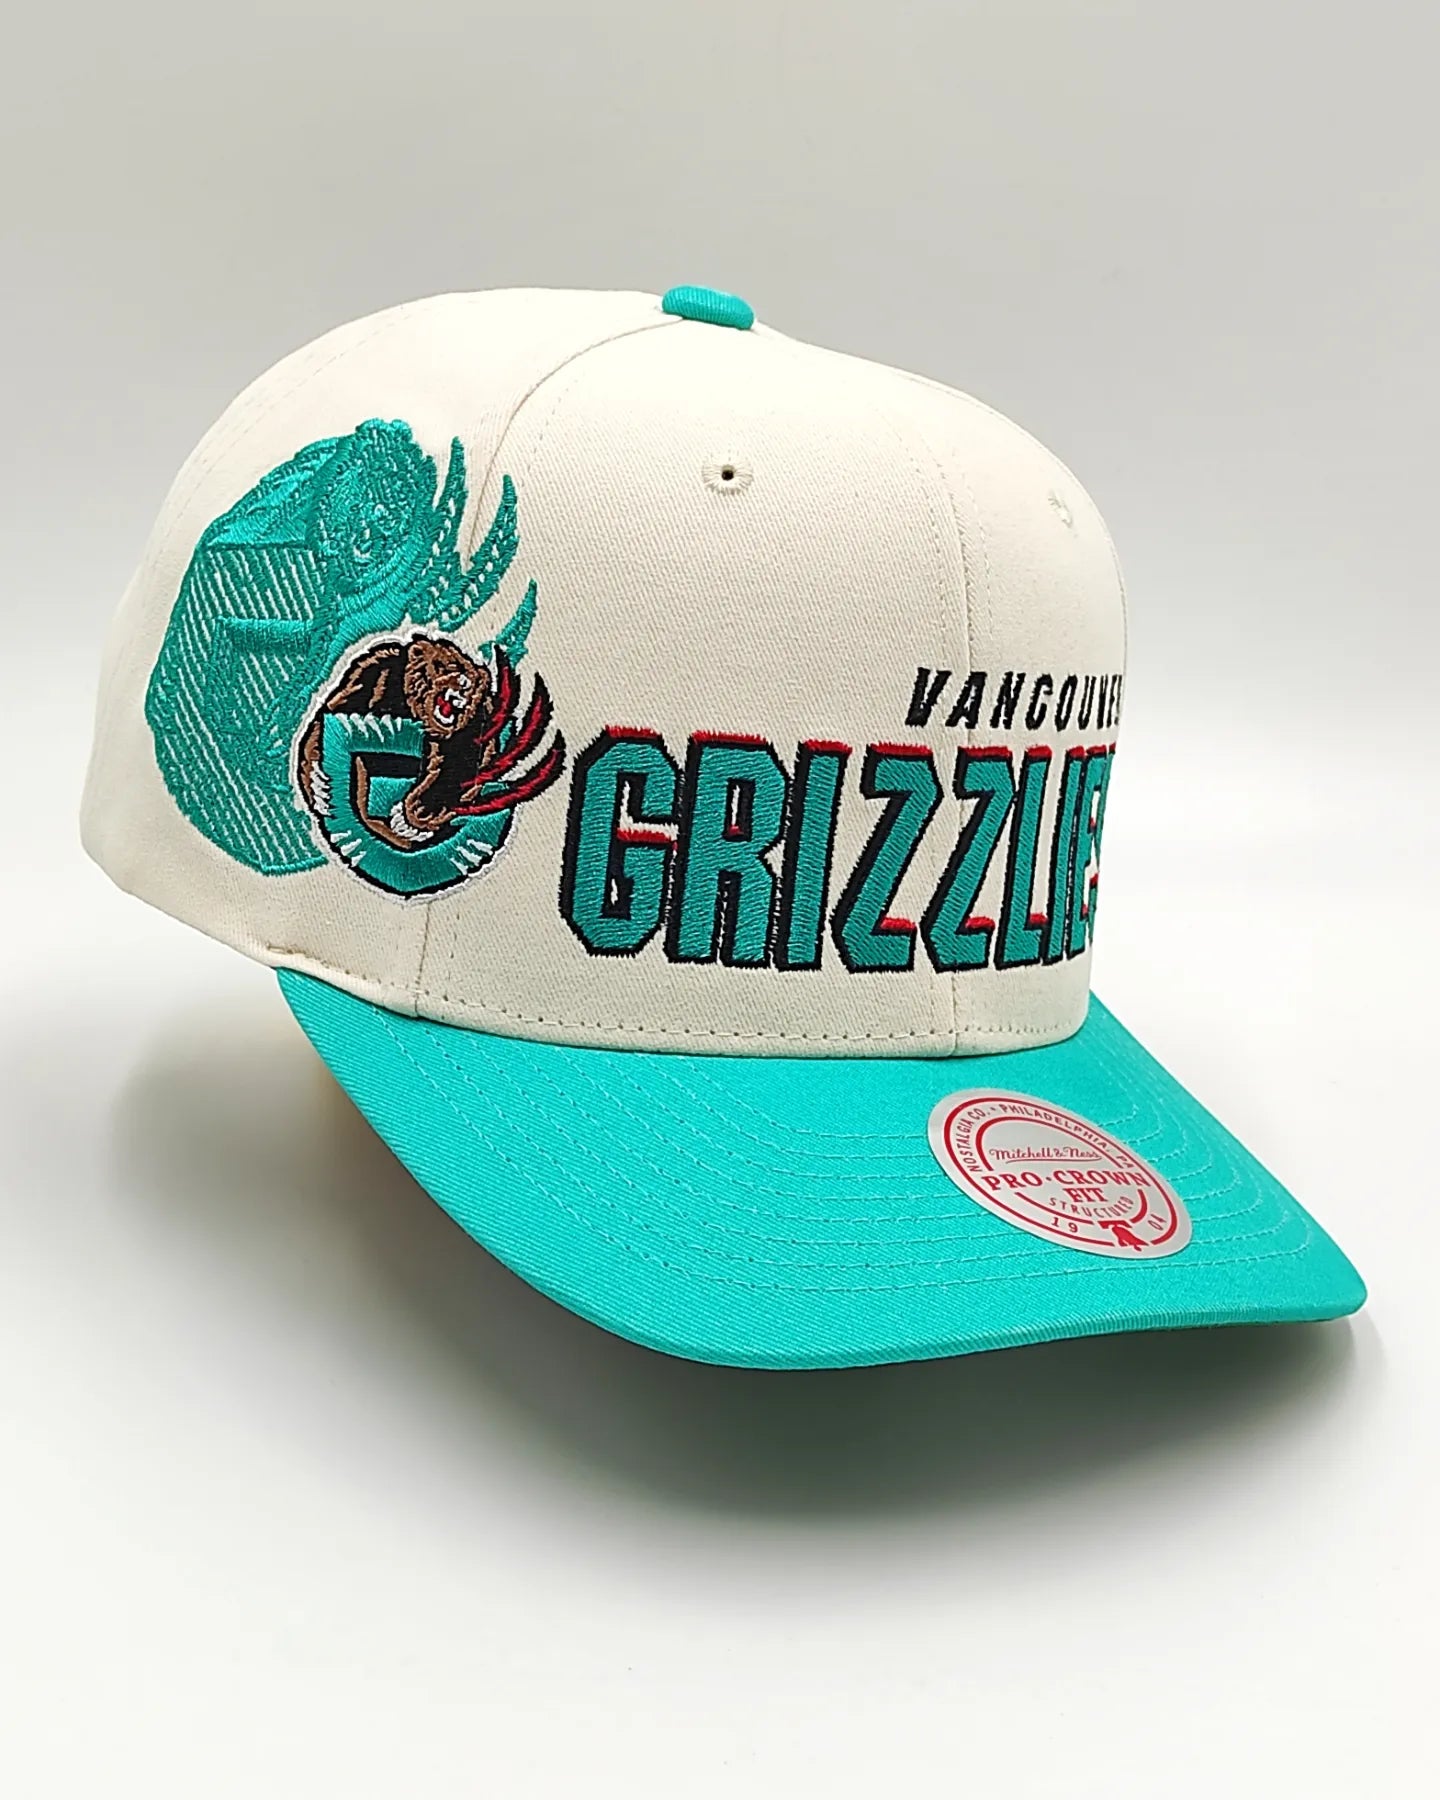 Mitchell & Ness Vancouver Grizzlies '96 Draft' Pro Crown Snapback Off